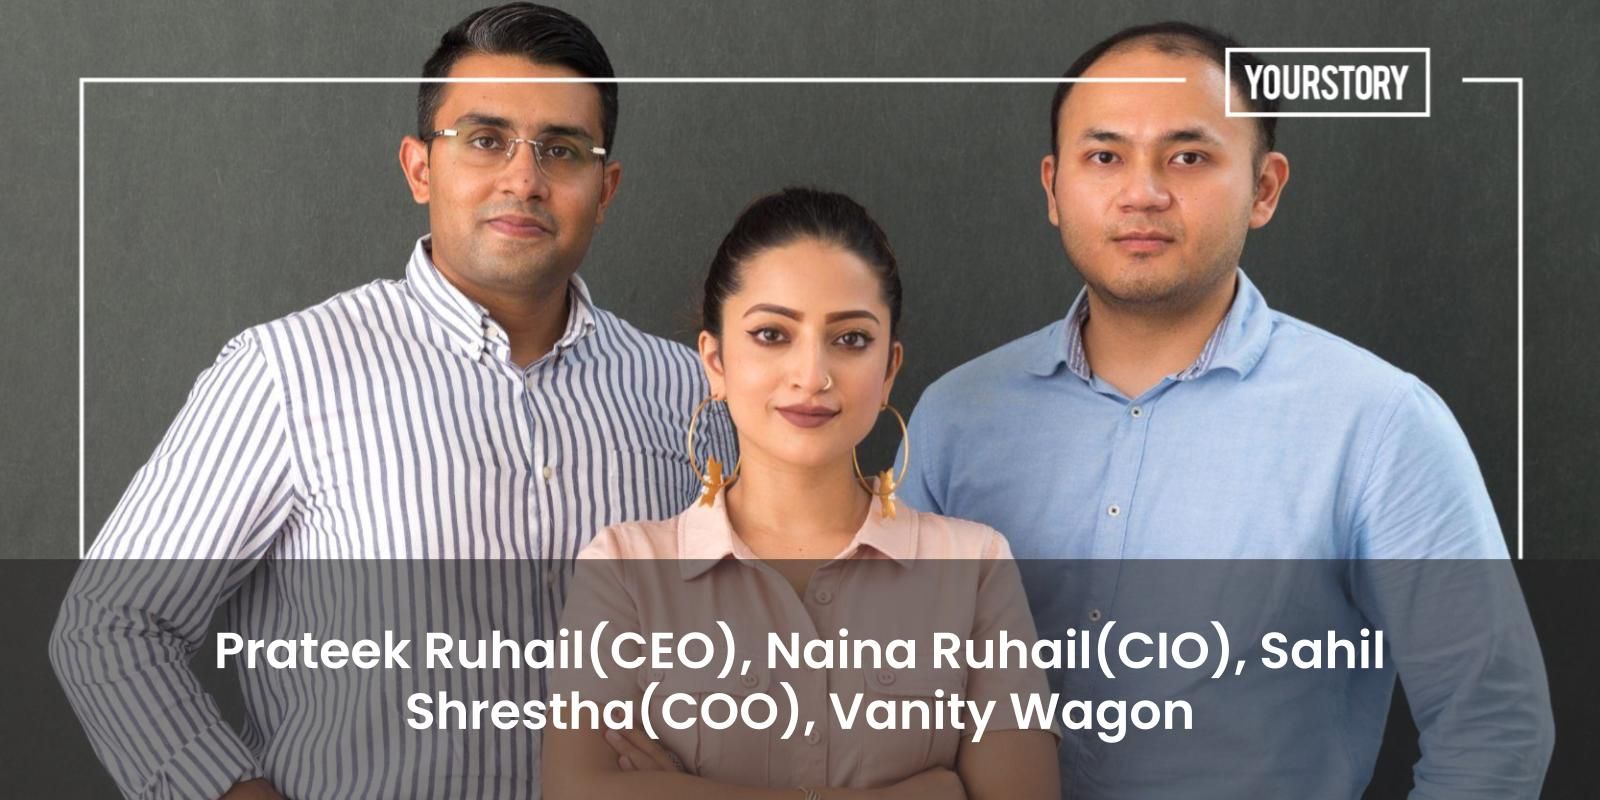 [Funding alert] Clean beauty marketplace Vanity Wagon raises Rs 5.5 Cr led by Inflection Point Ventures